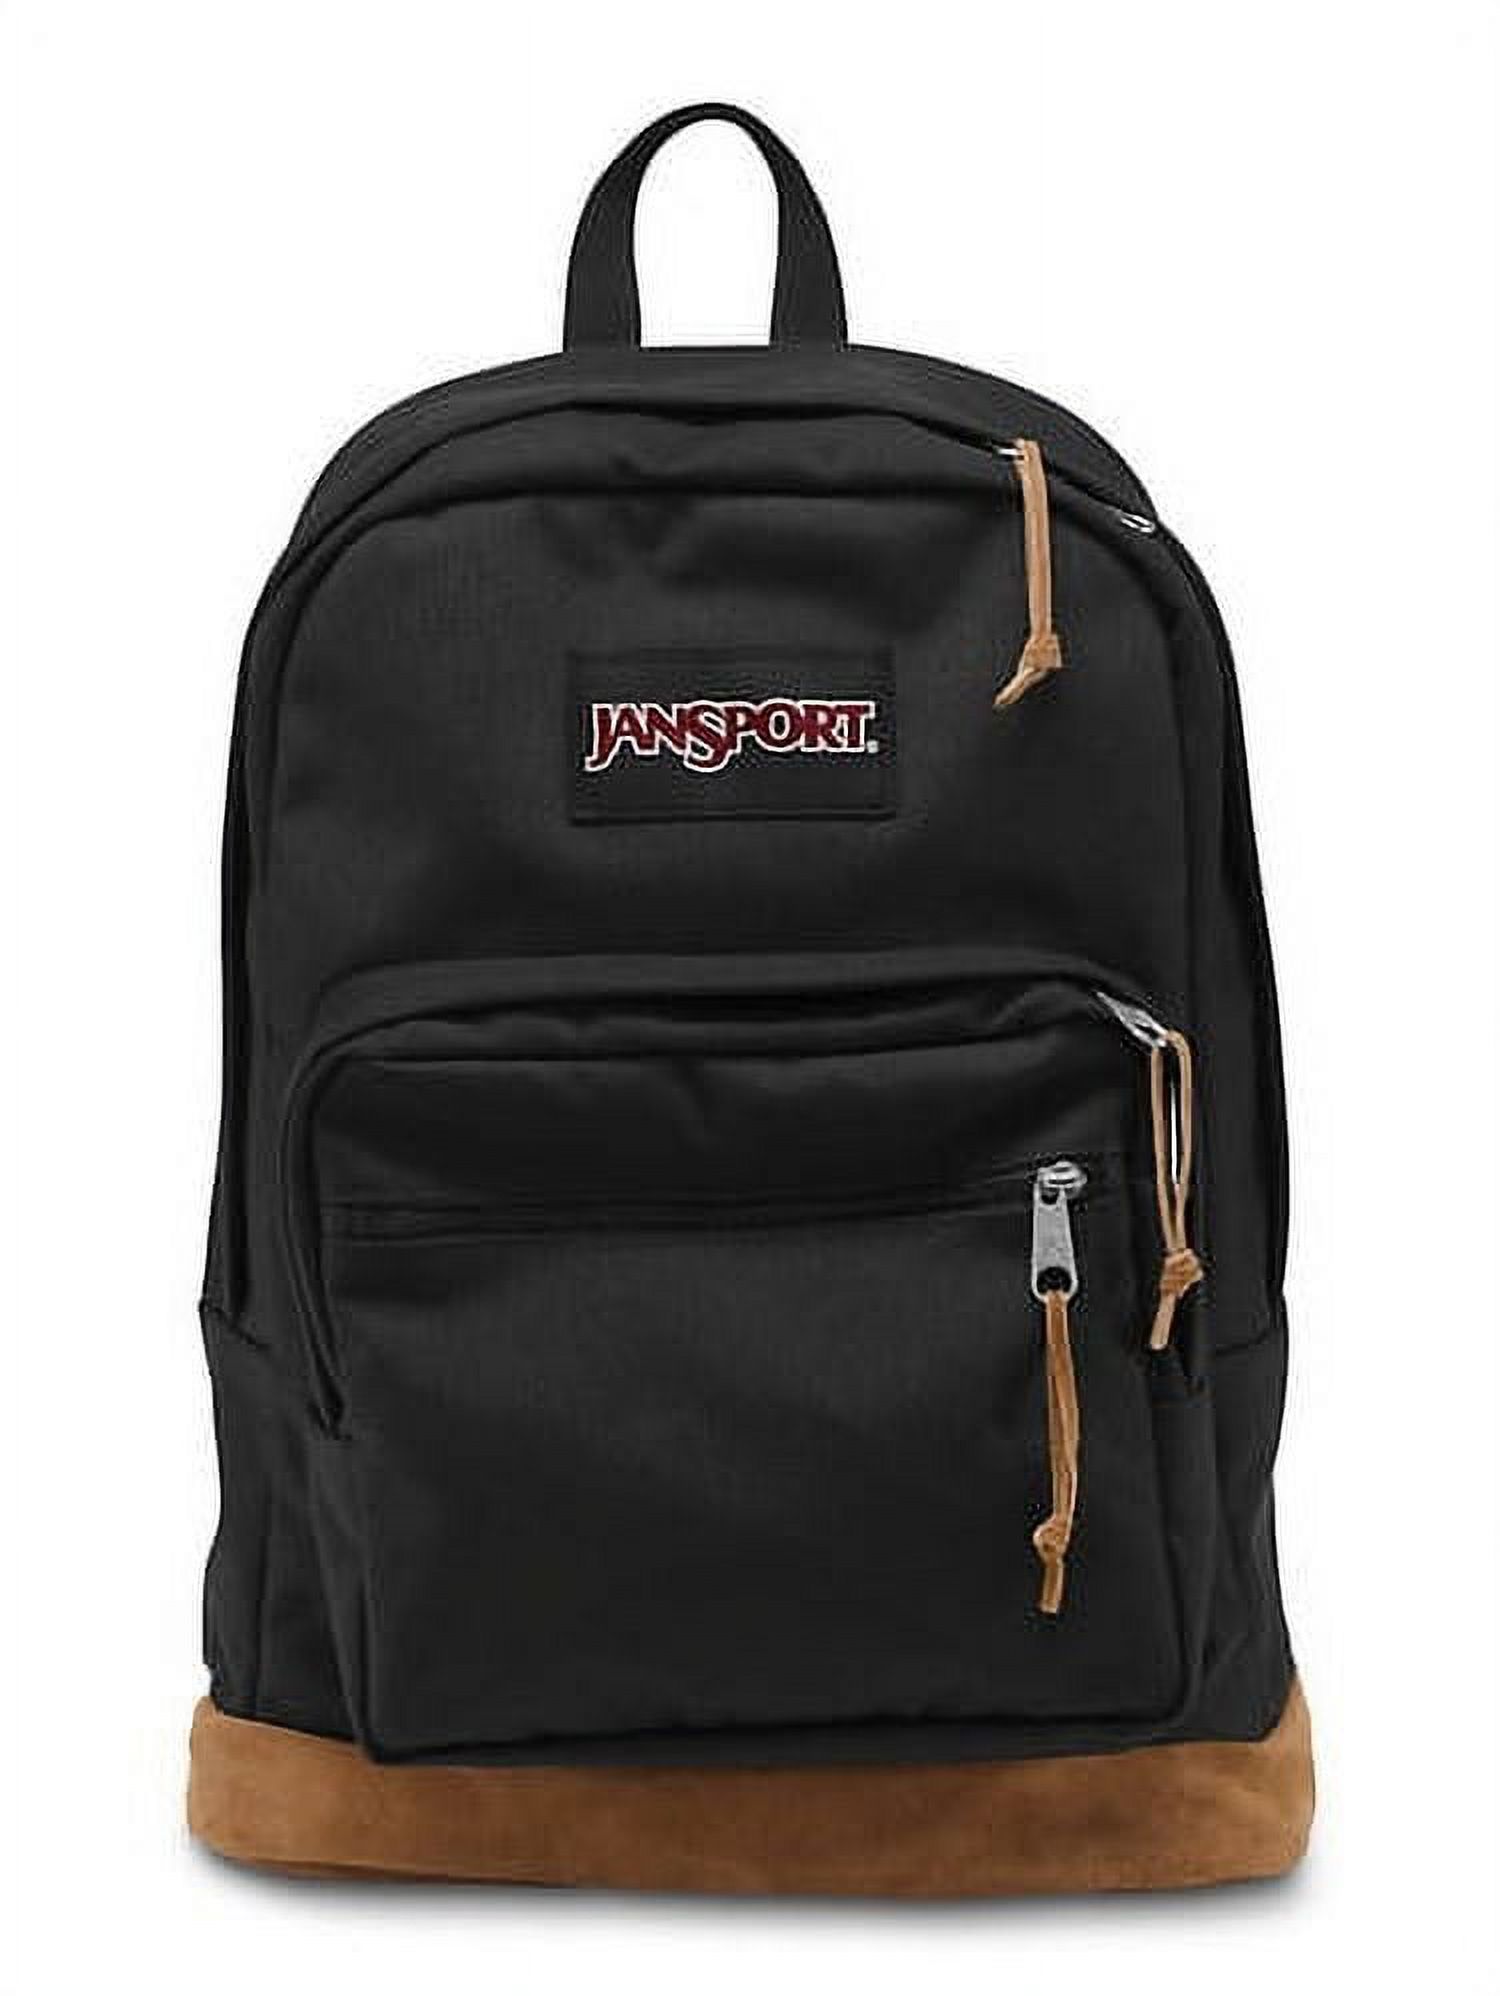 RIGHT PACK Labtop School Backpack - Black - image 1 of 3